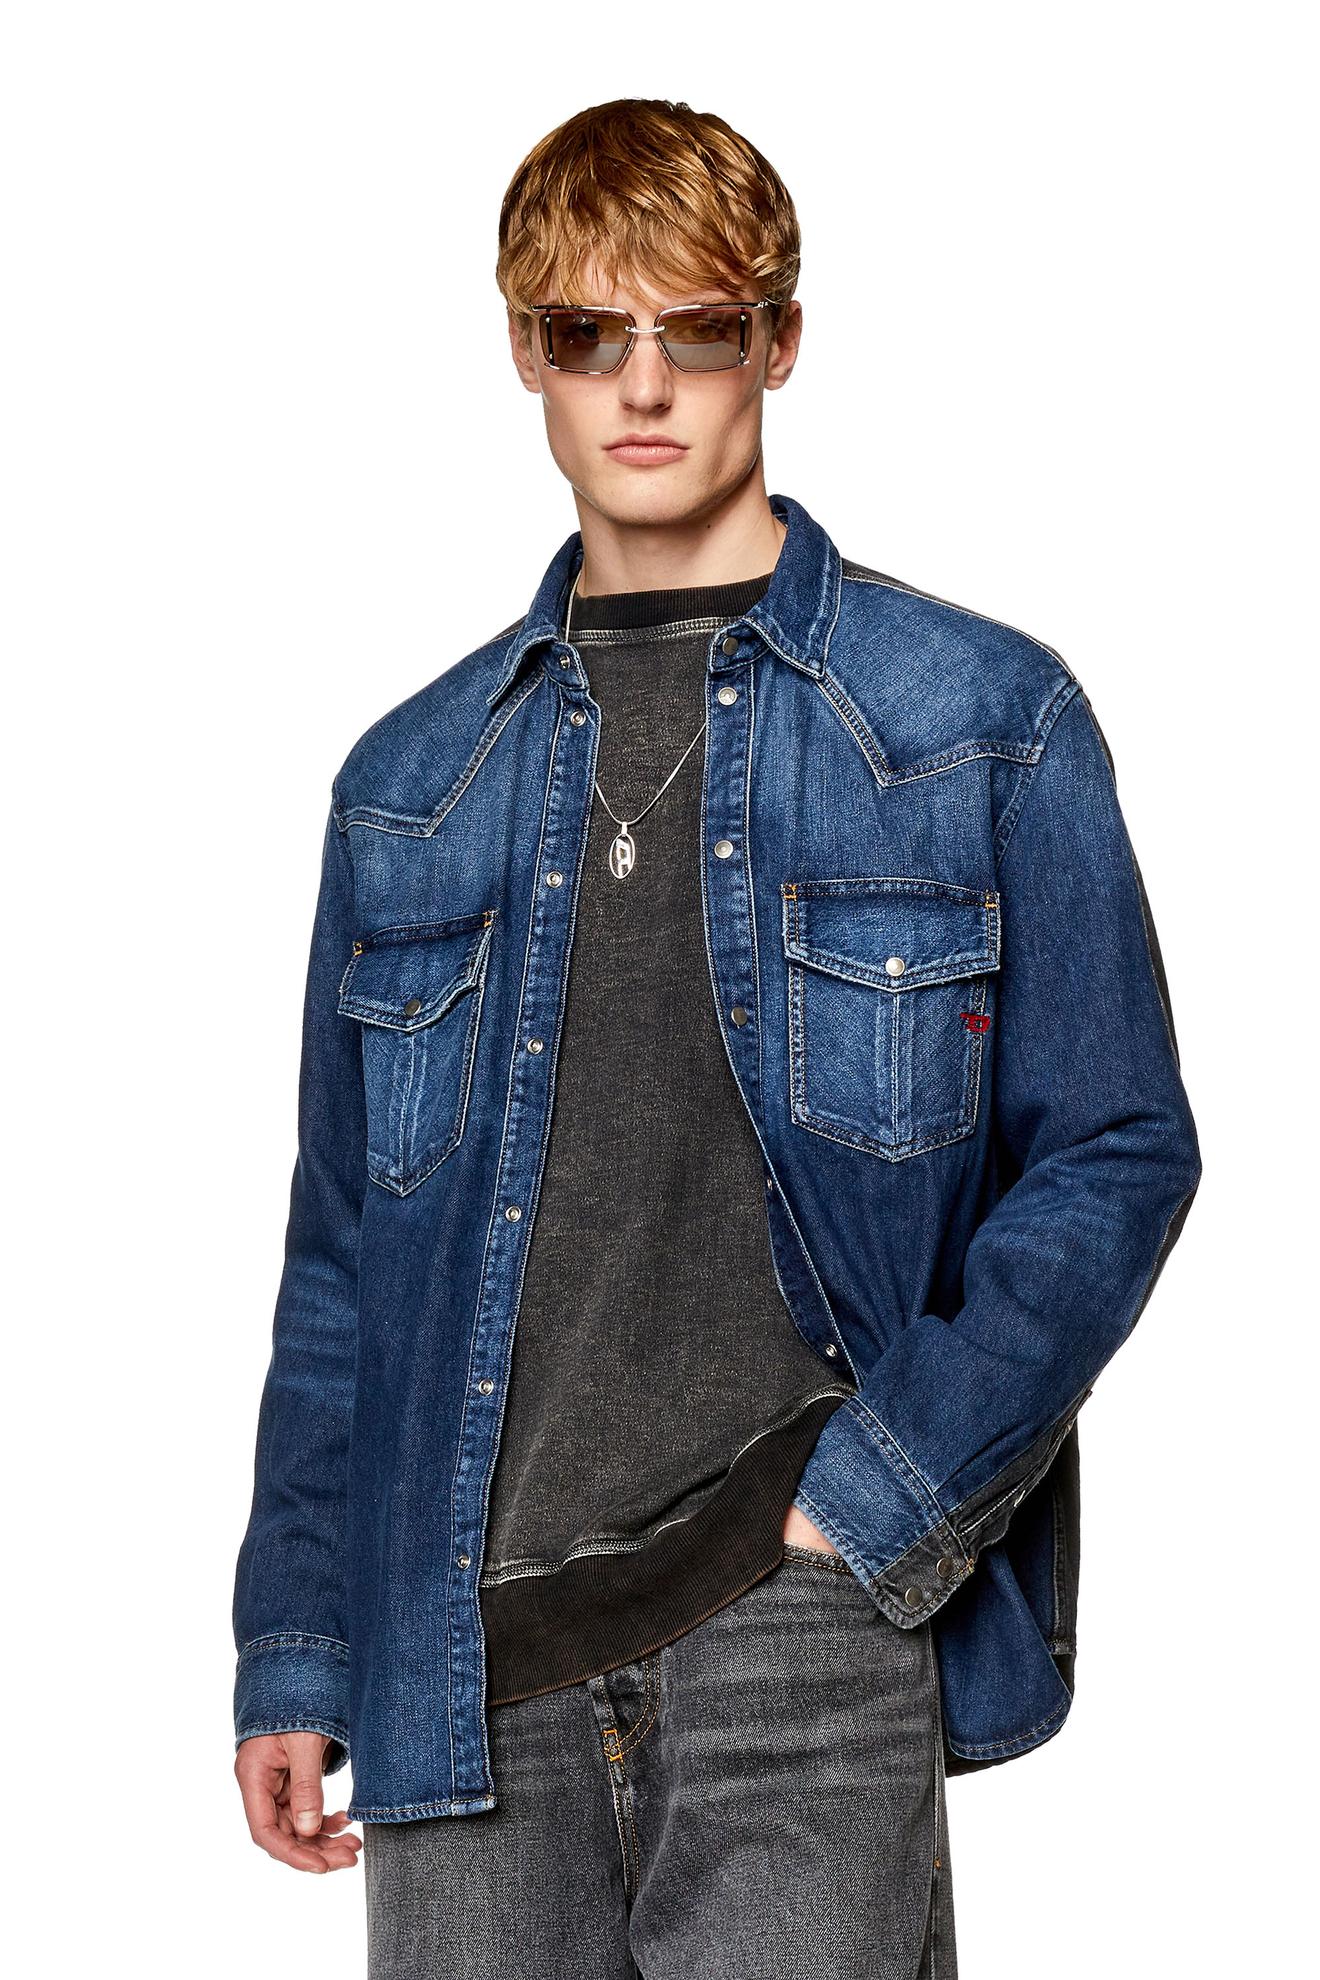 Western shirt in two-tone denim offers at $315 in Diesel